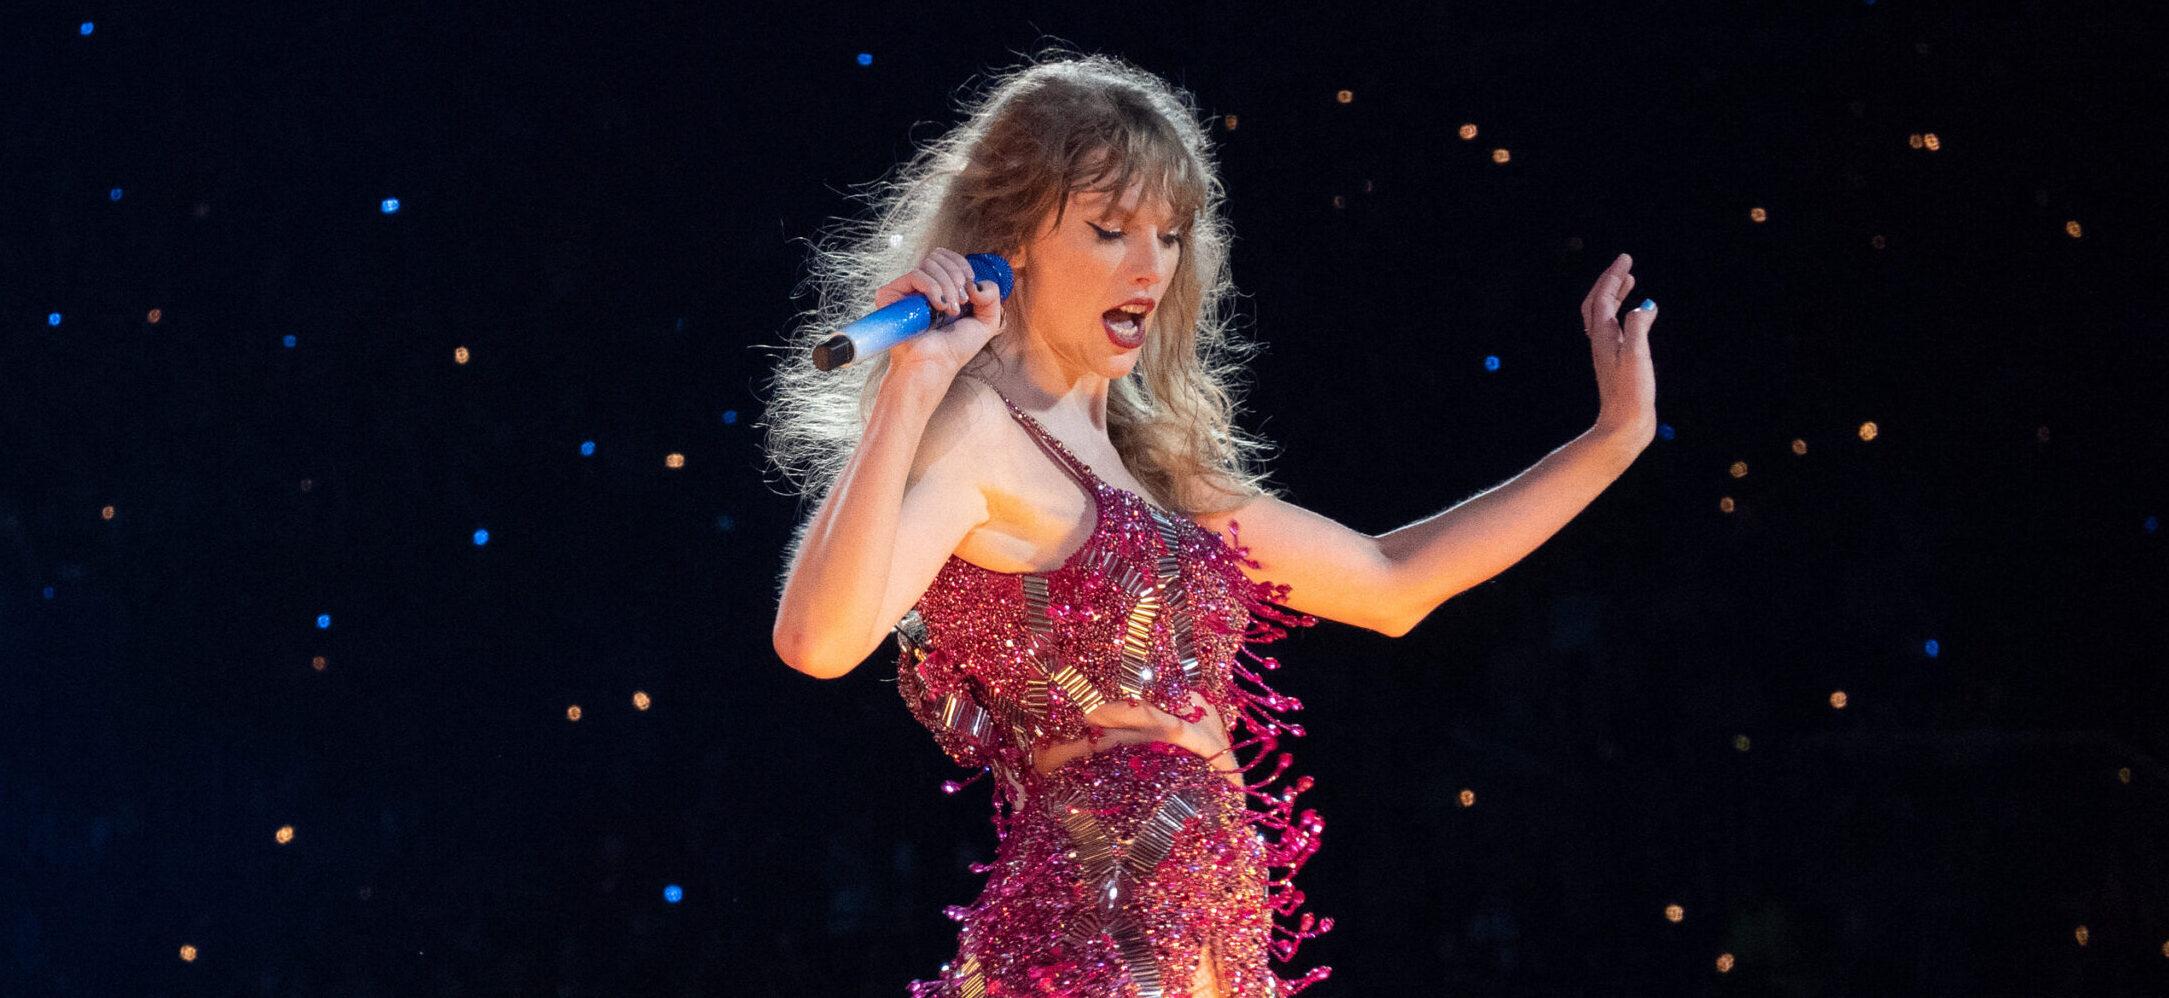 Taylor Swift's Eras Tour can be seen from space!